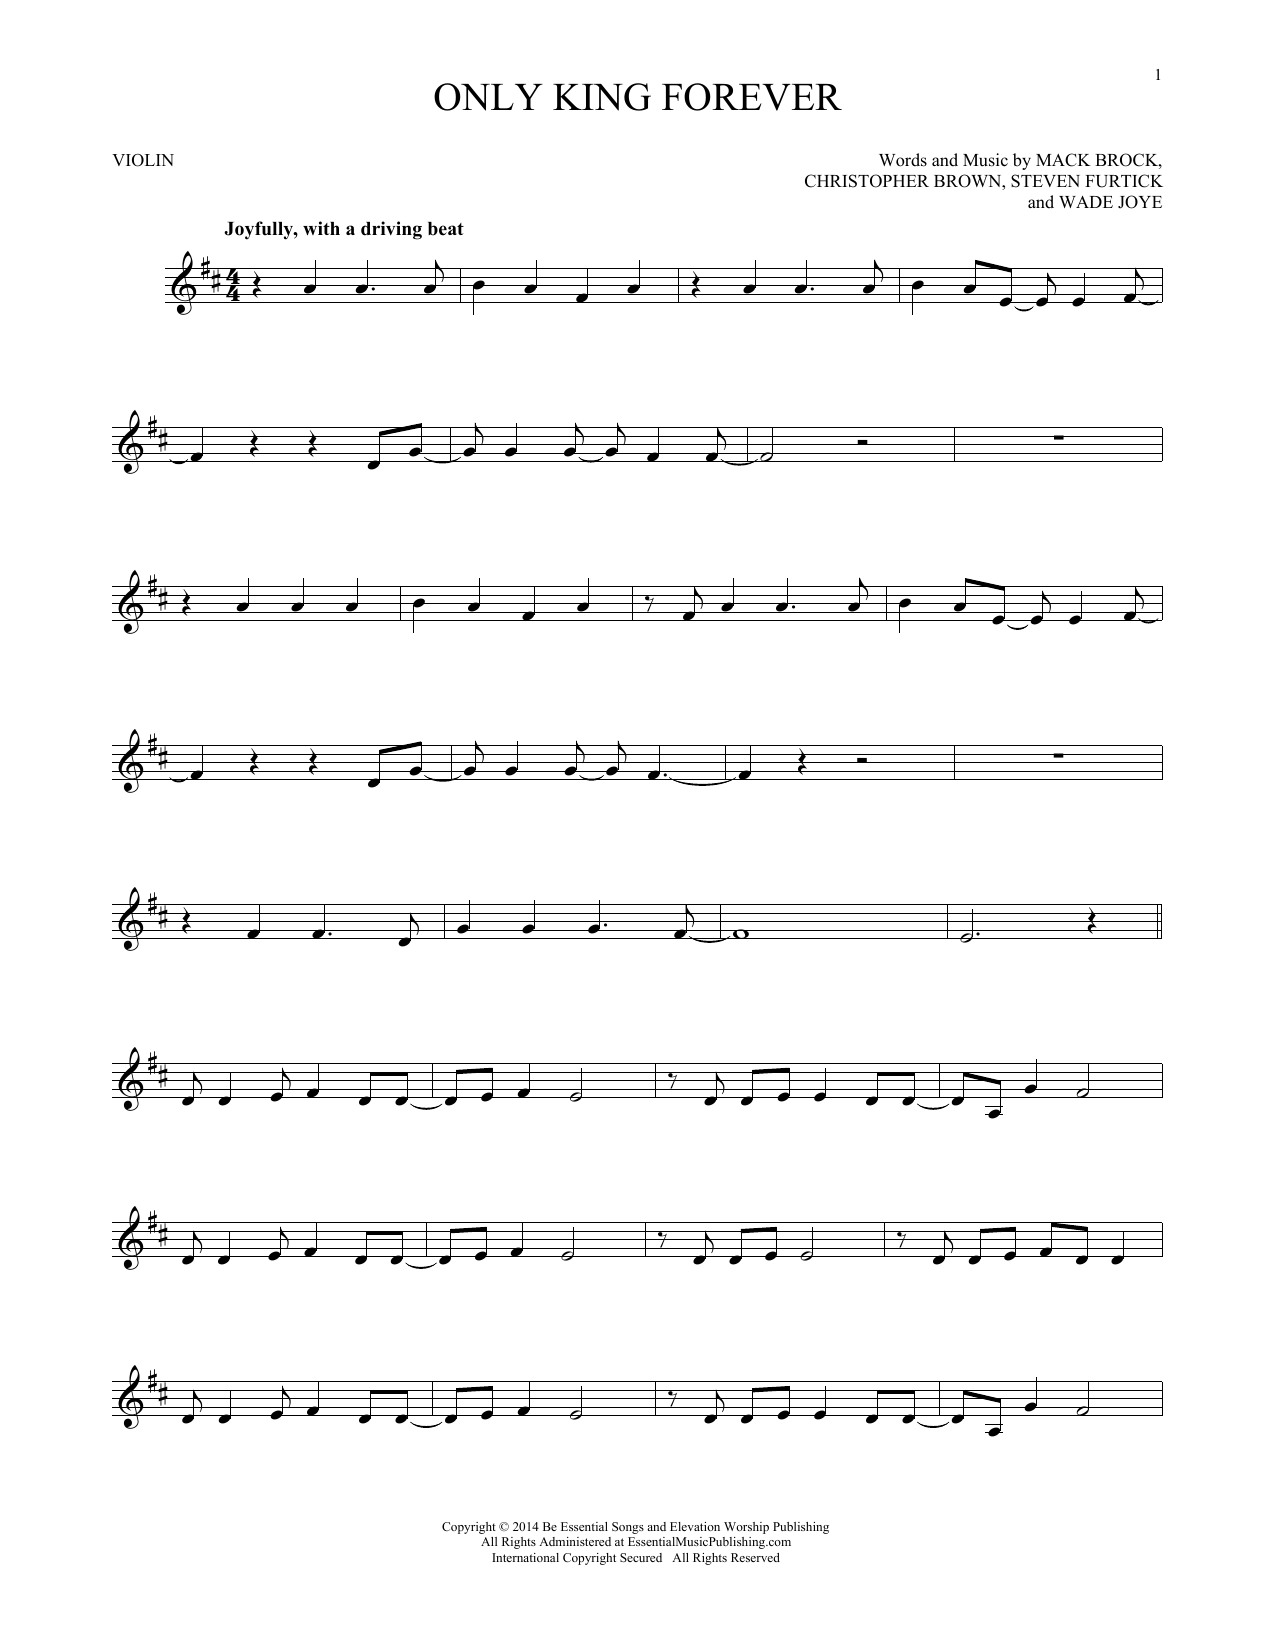 7eventh Time Down Only King Forever sheet music notes printable PDF score